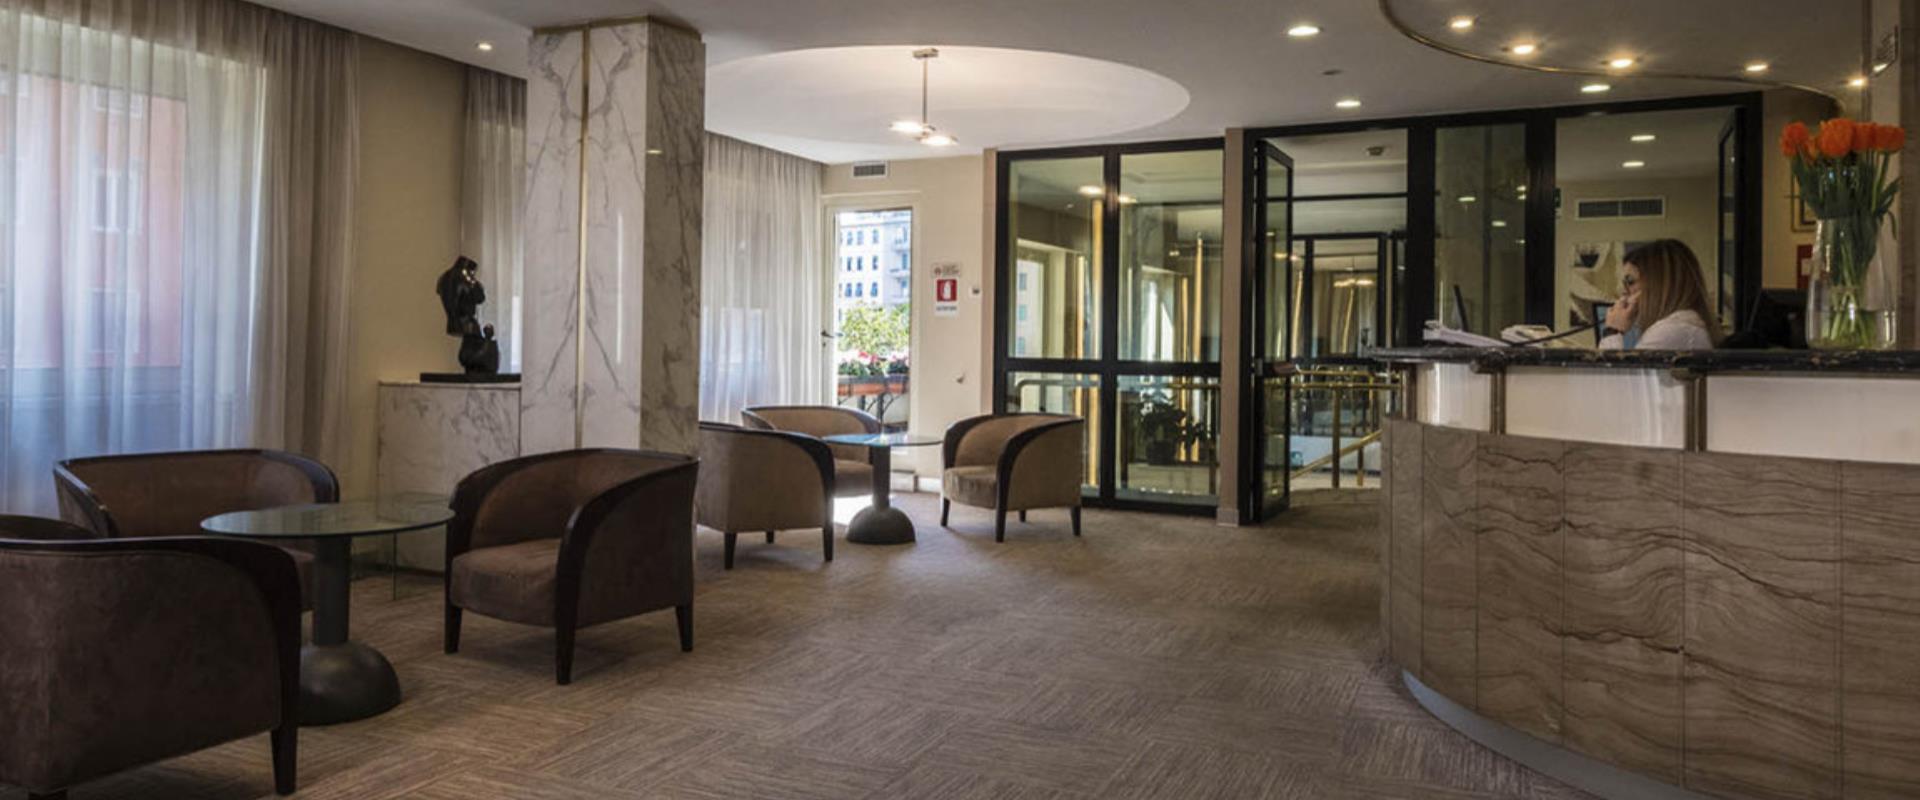 Best Western Hotel Piccadilly Hall, Hotel 3 stars San Giovanni in Rome, recently renovated